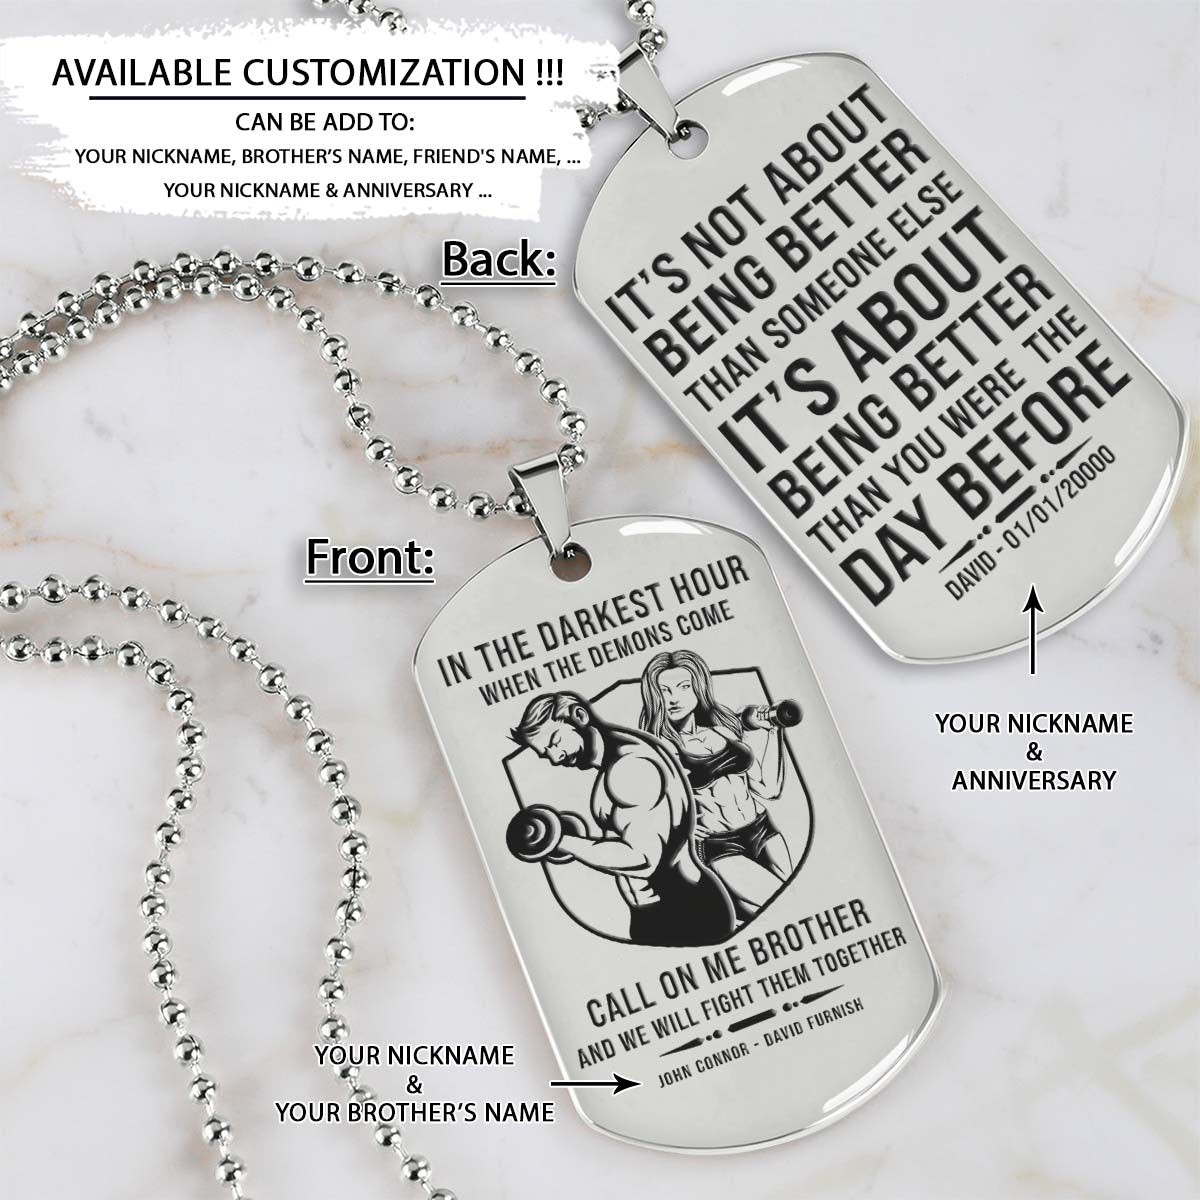 Call On Me Brother - It's About Being Better Than You Were The Day Before - Gym - Fitness Center - Workout - Gym Dog Tag - Gym Necklace - Engrave Dog Tag